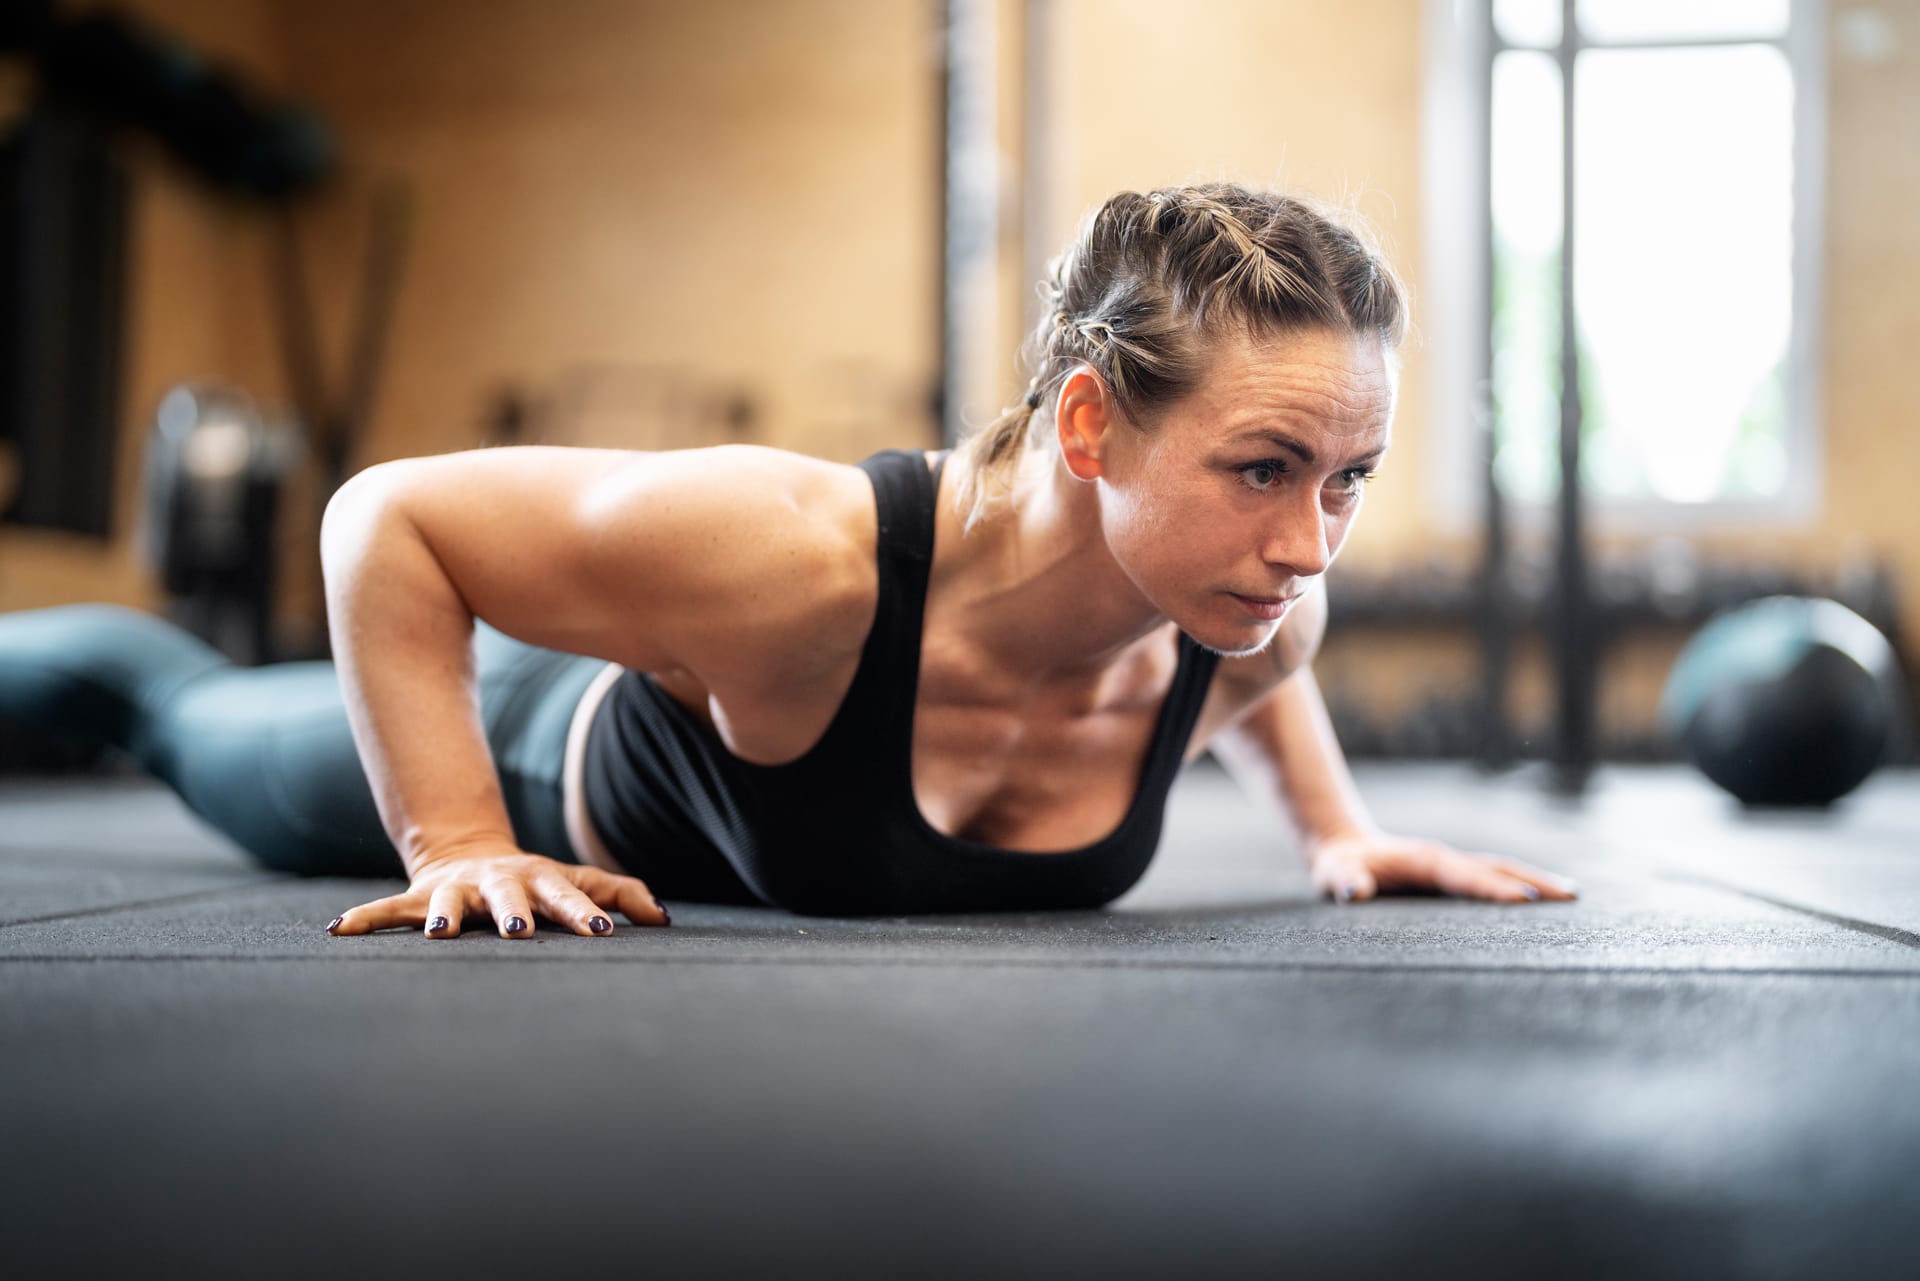 Best sports images side view woman doing burpees